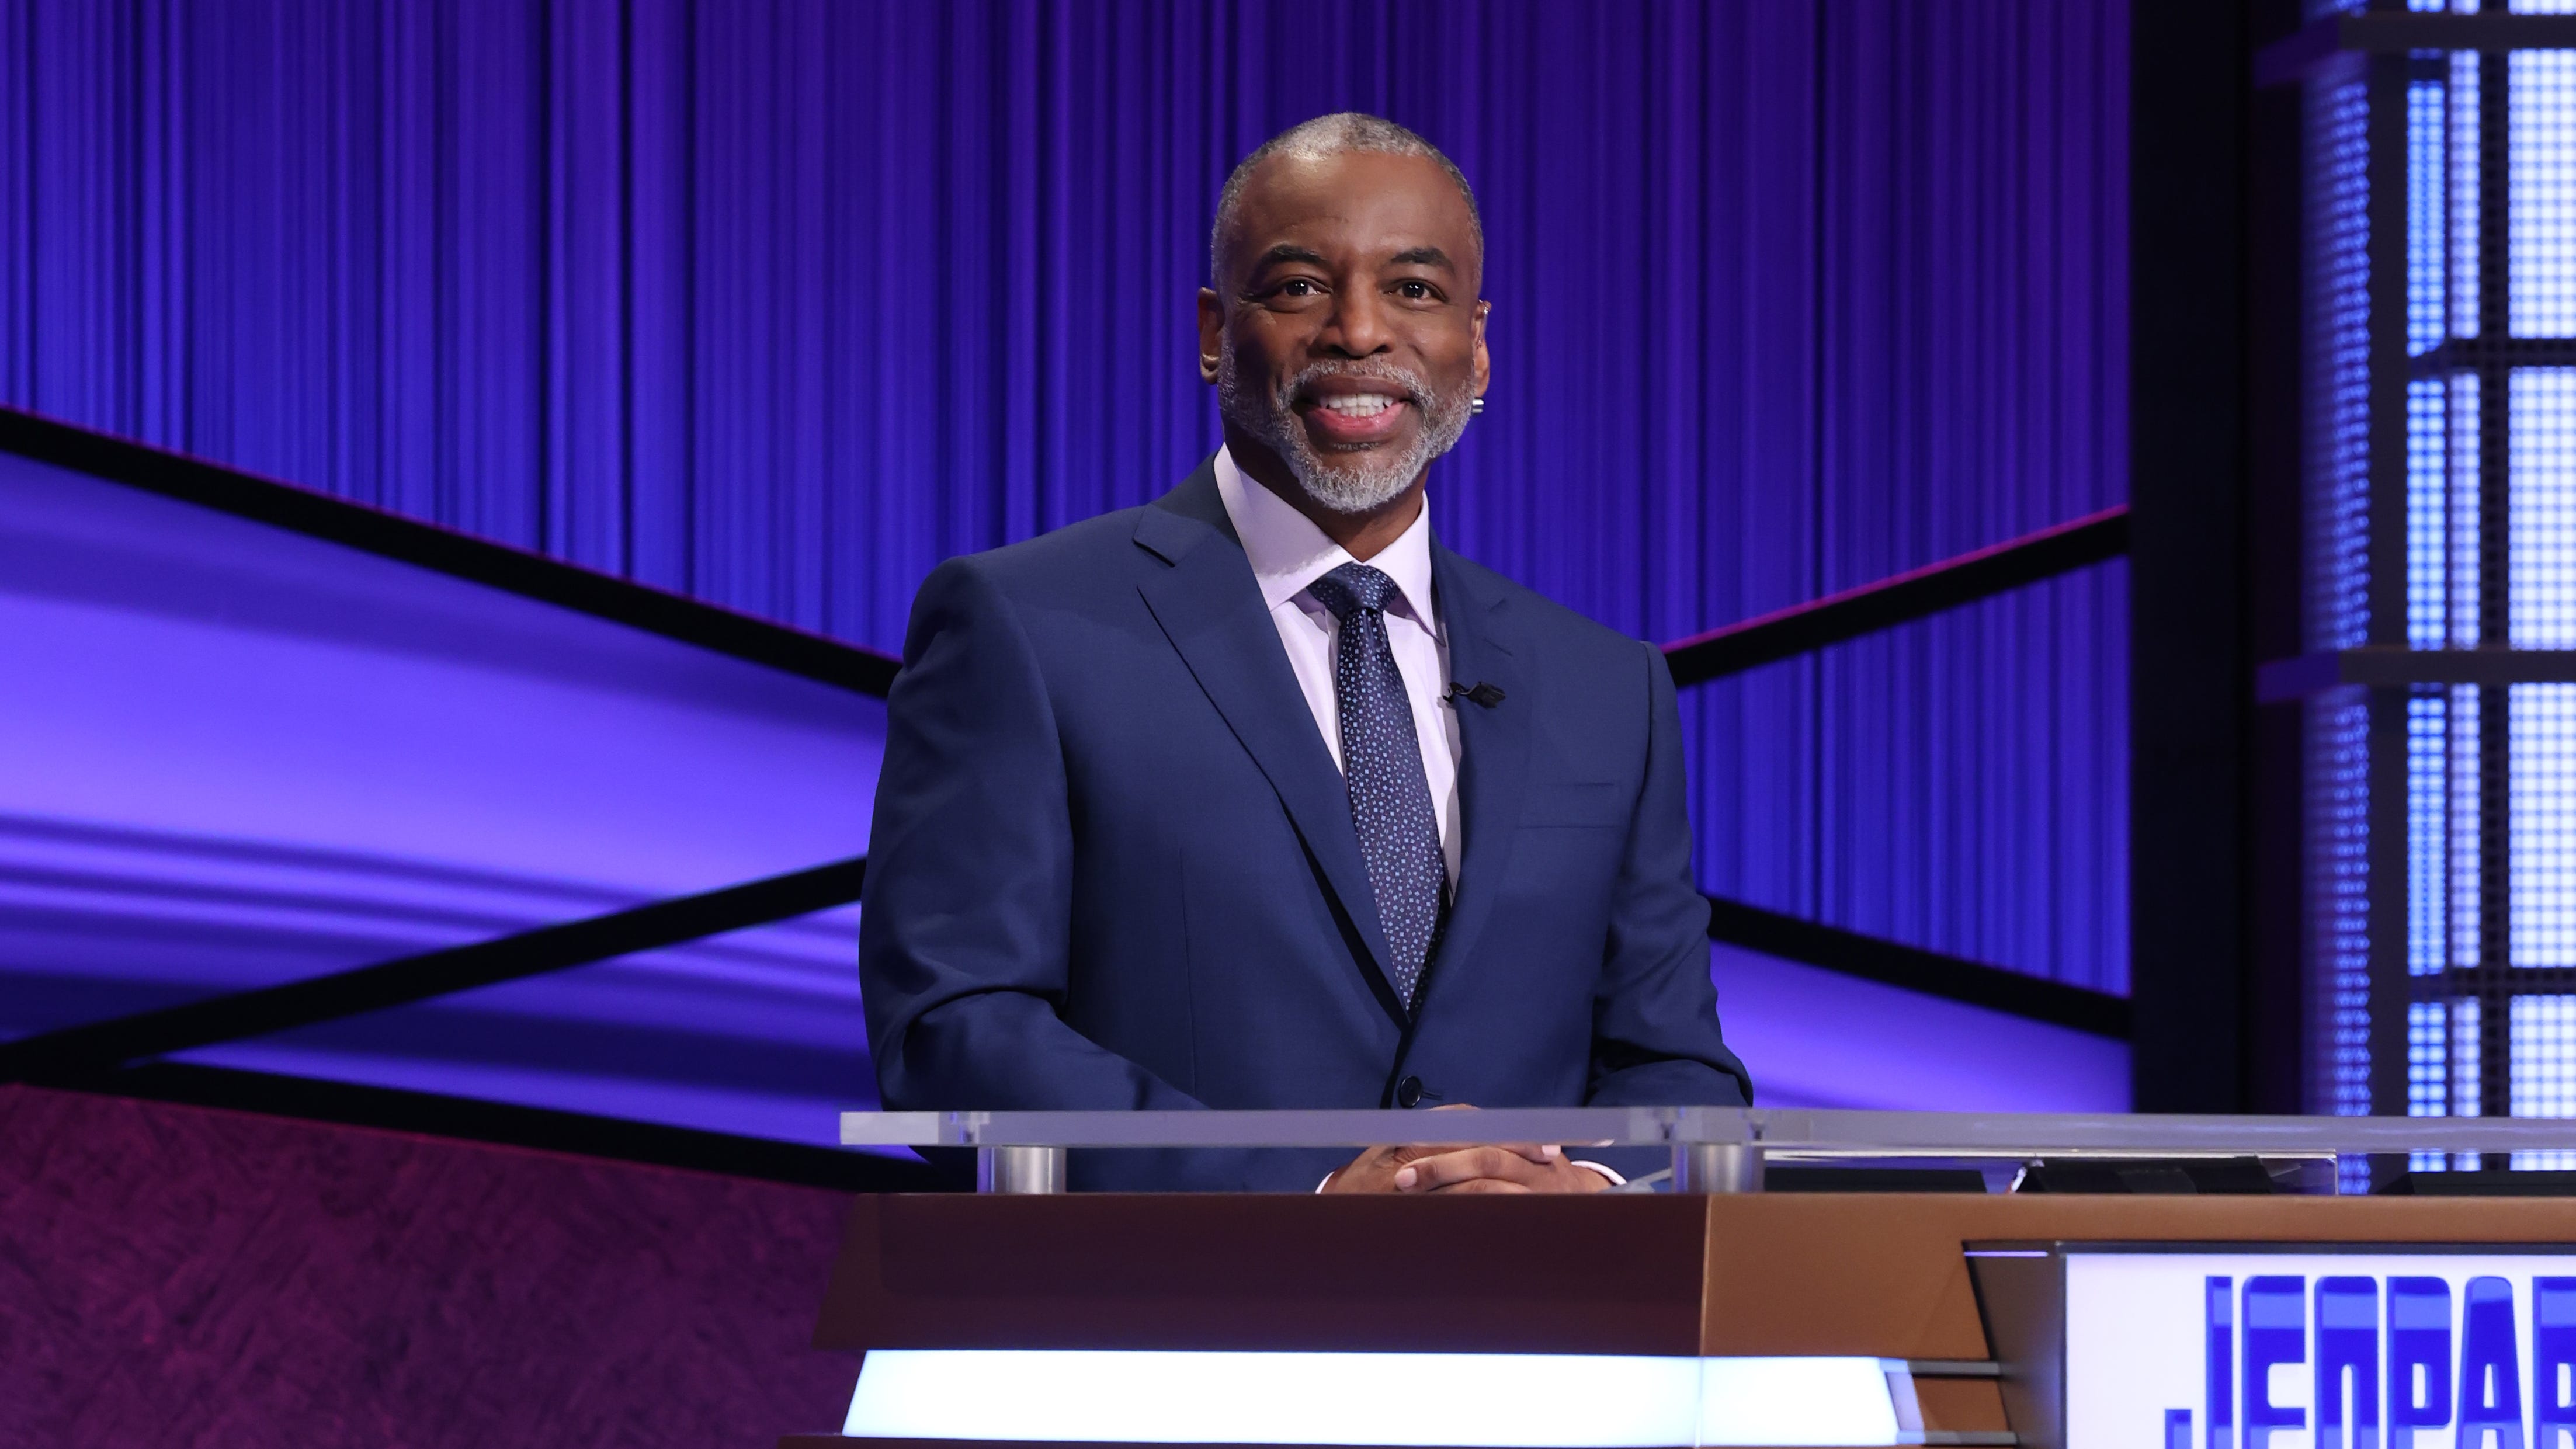 LeVar Burton was the most enthusiastic campaigner among guest hosts, and embraced by fans on social media.